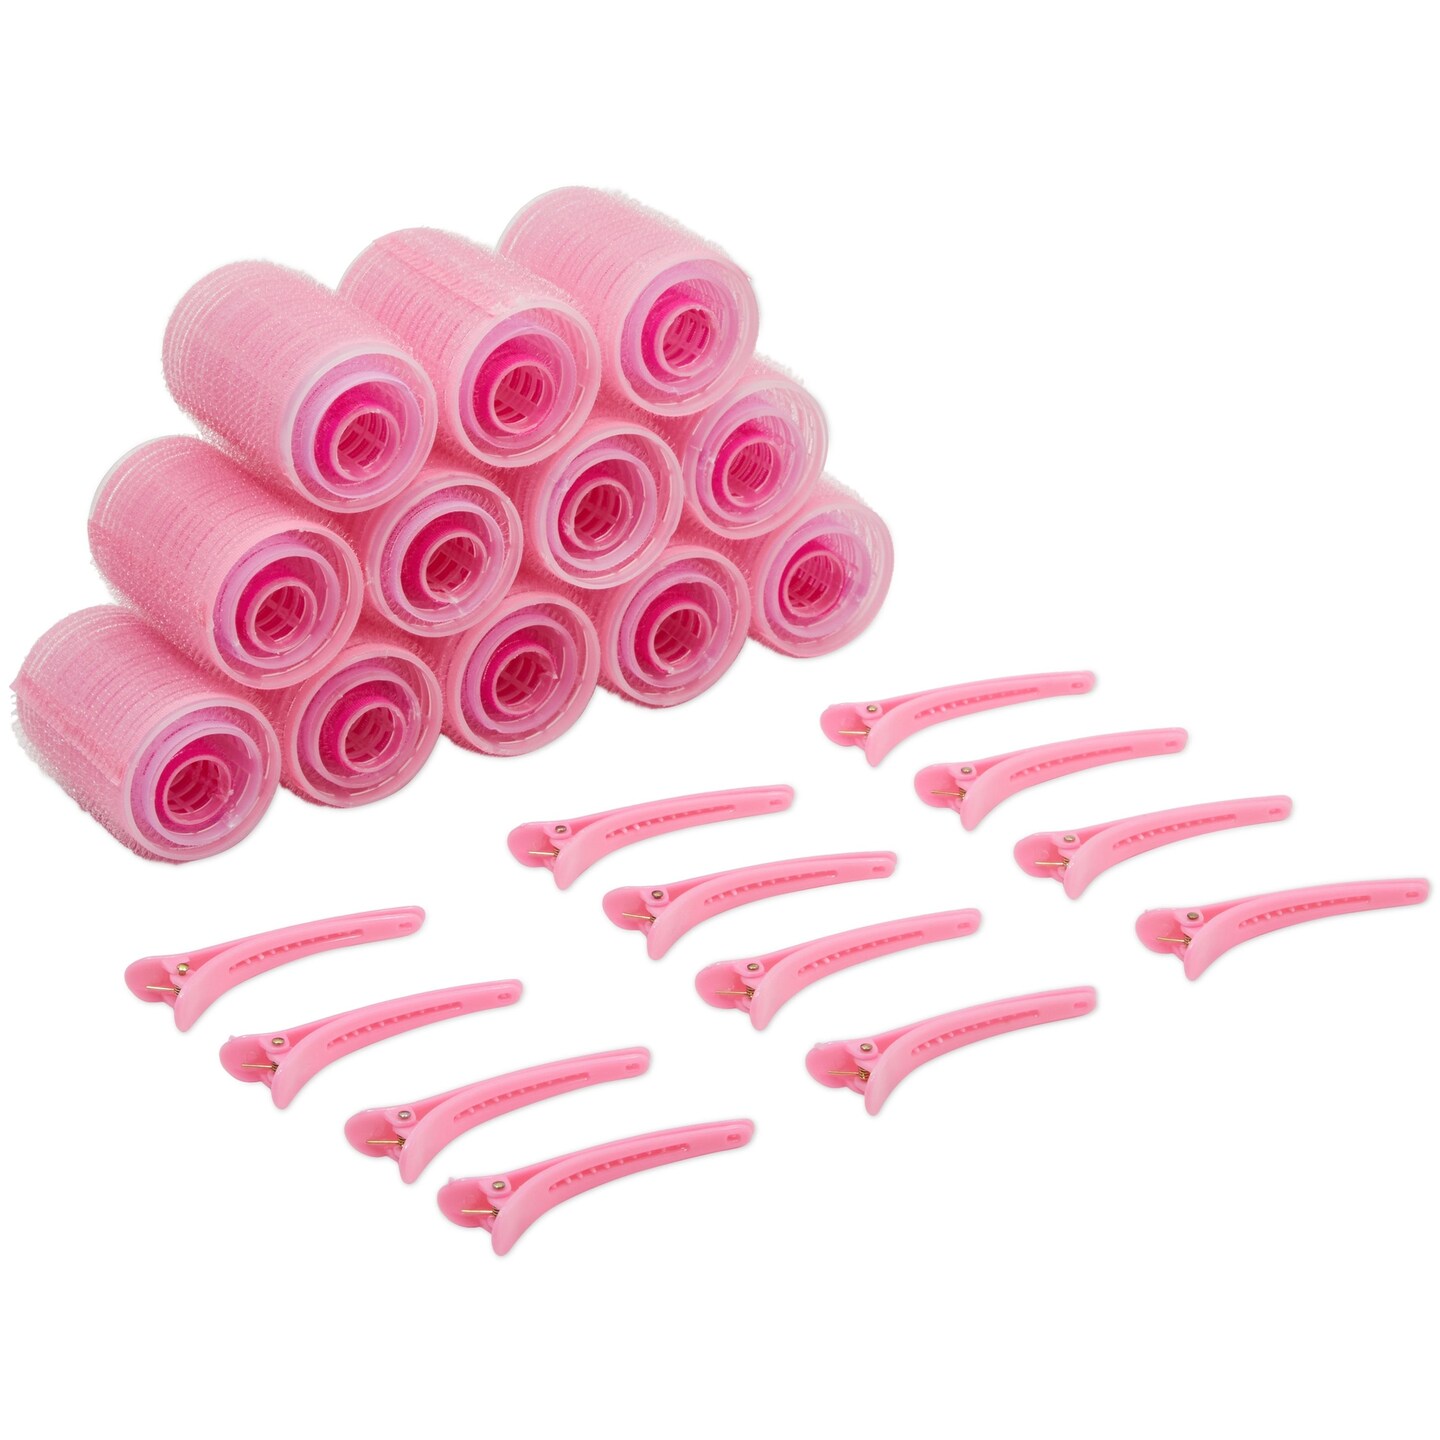 48 Piece Set Self-Grip Hair Rollers with Clips - Pink Hair Curlers in 3 Sizes with Duck bill Shaped Clips Set for Hair Curls (36 Hair Tension Rollers, 12 Clips)